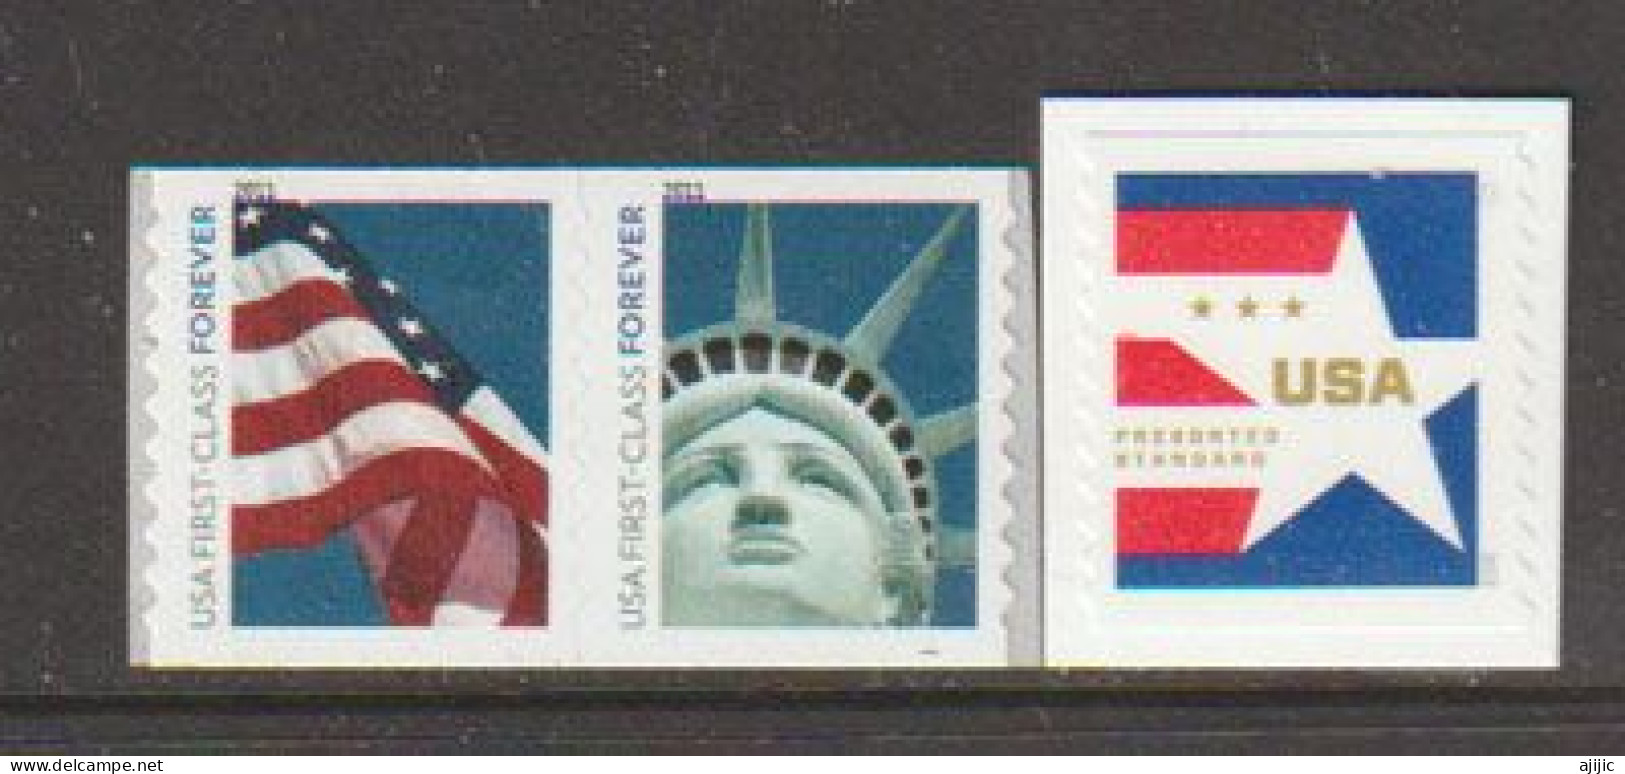 Flags USA (Star-Spangled Banner ) 3  Timbres Neufs **  (First Class Forever Stamps) - Nuovi